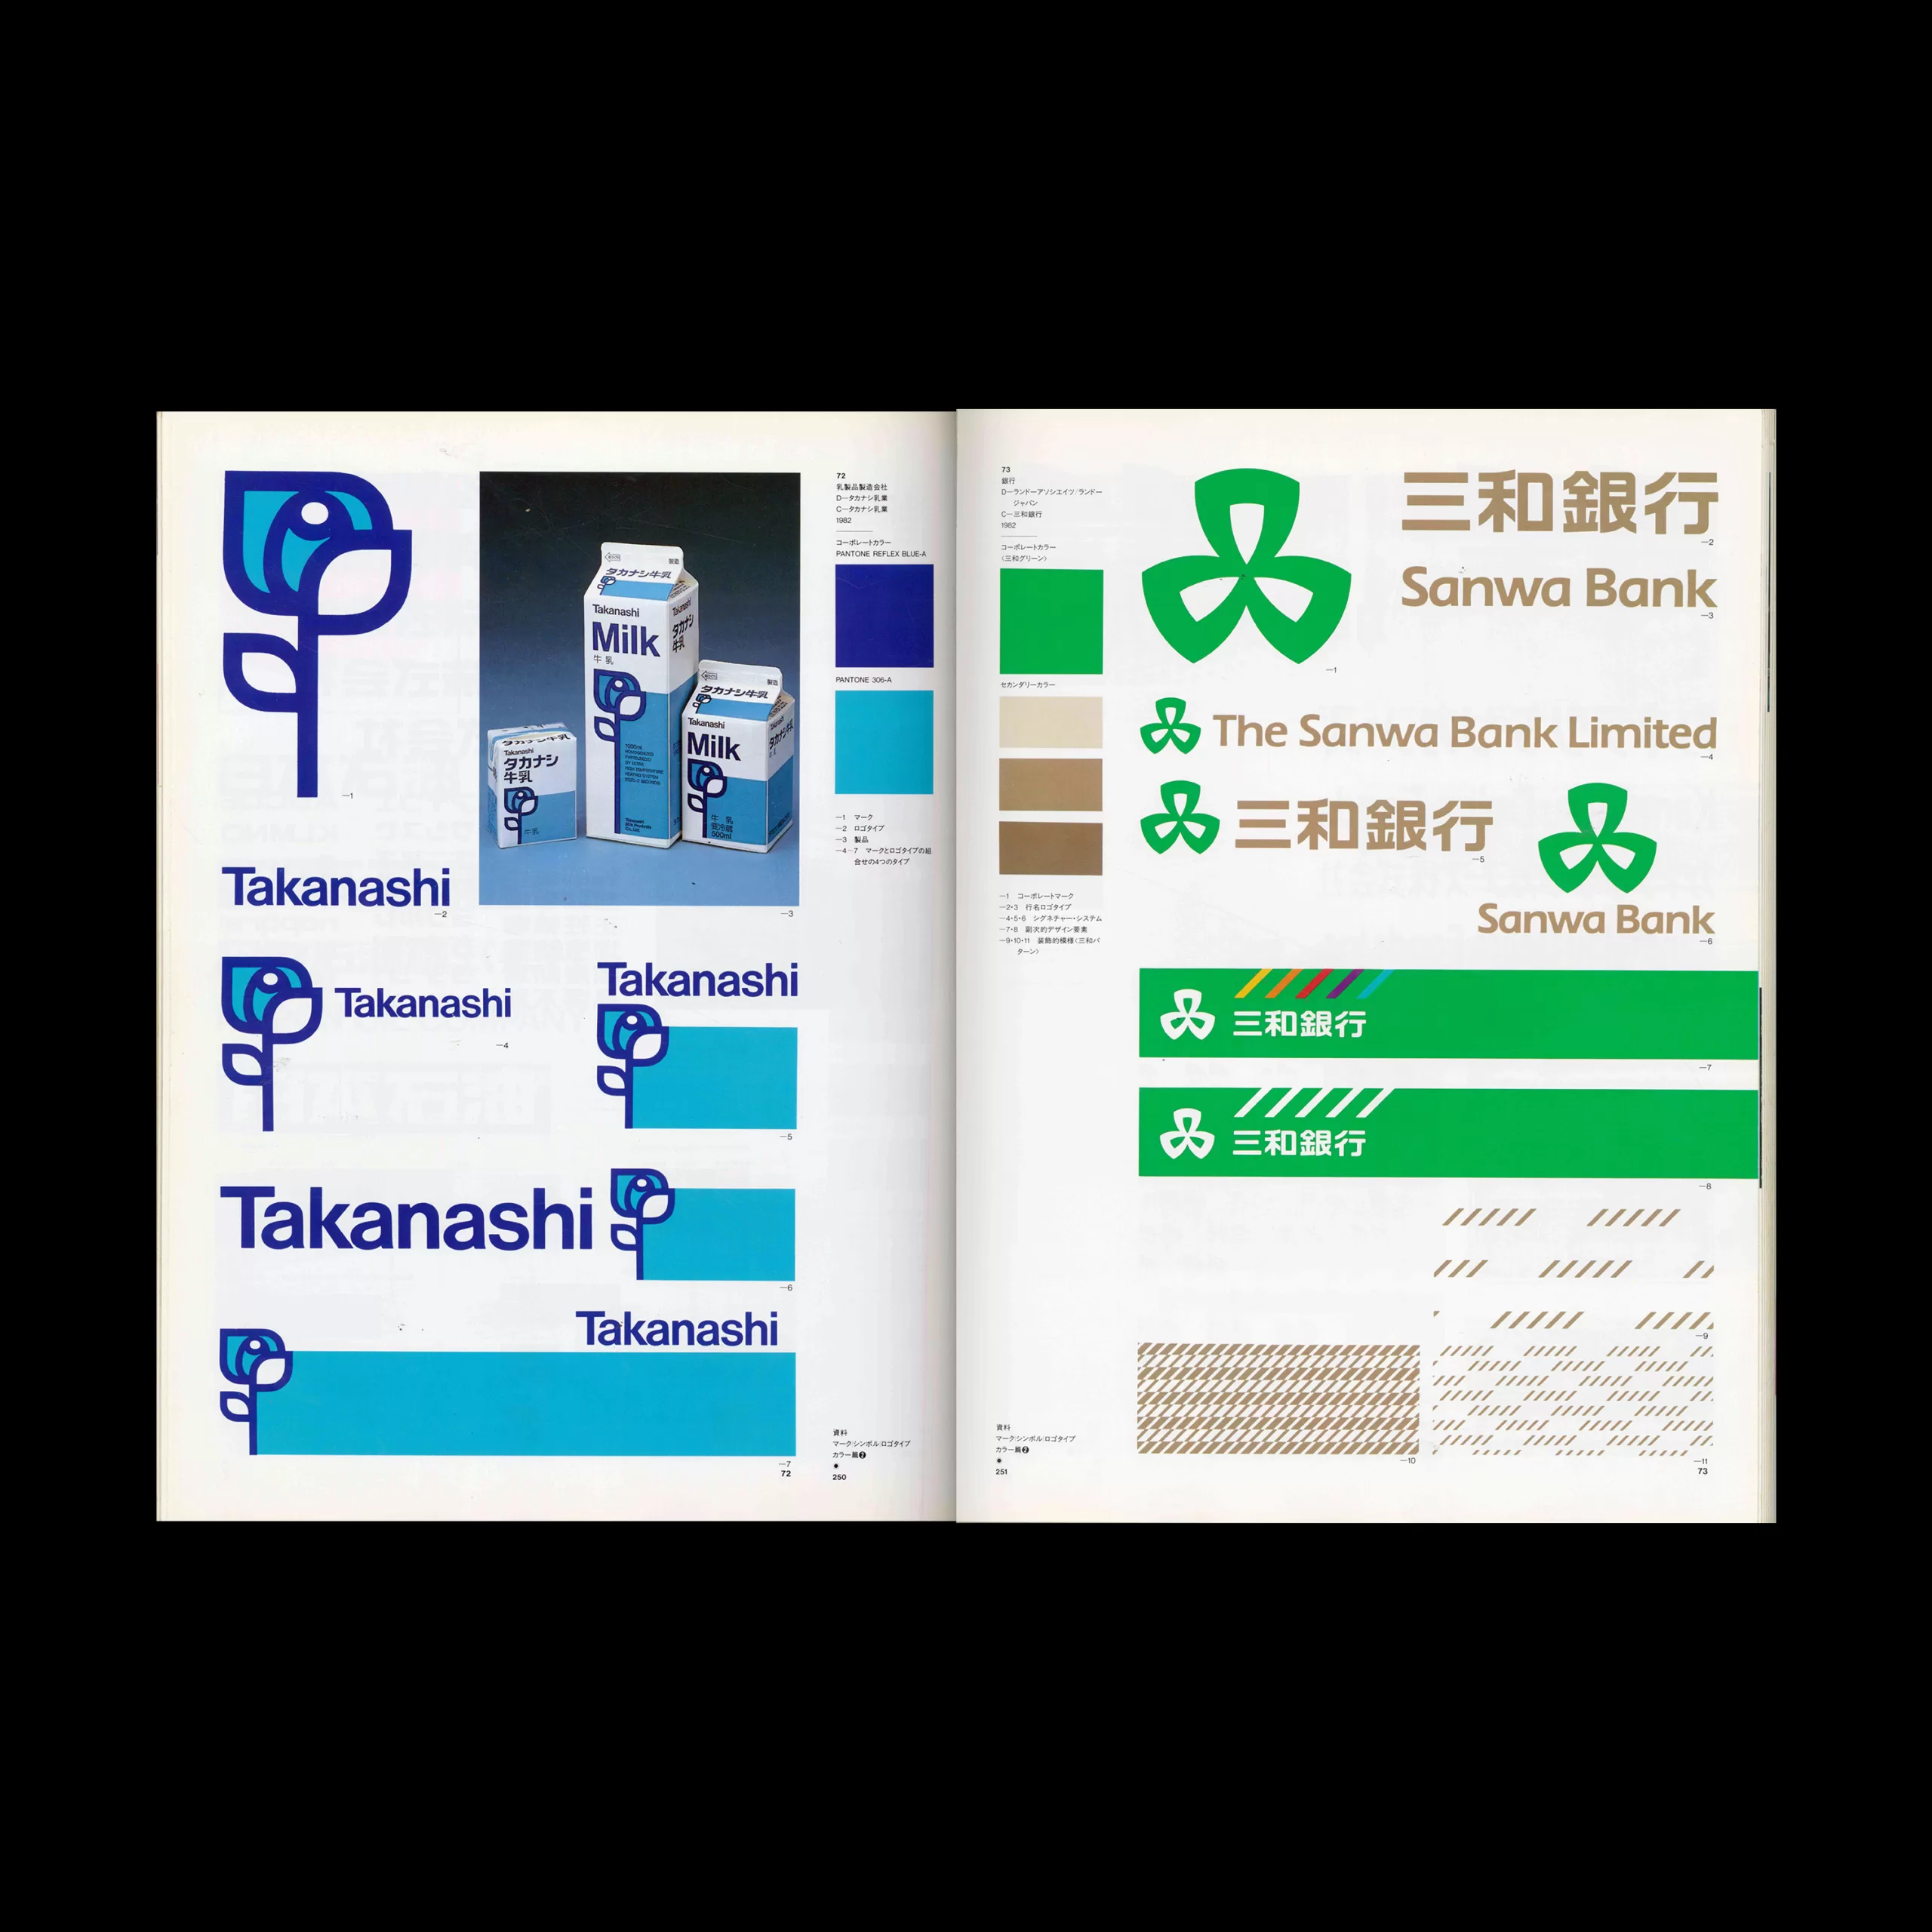 Japan's Trademarks & Logotypes in Full Color. Part 2, Graphic Sha, Tokyo, 1986